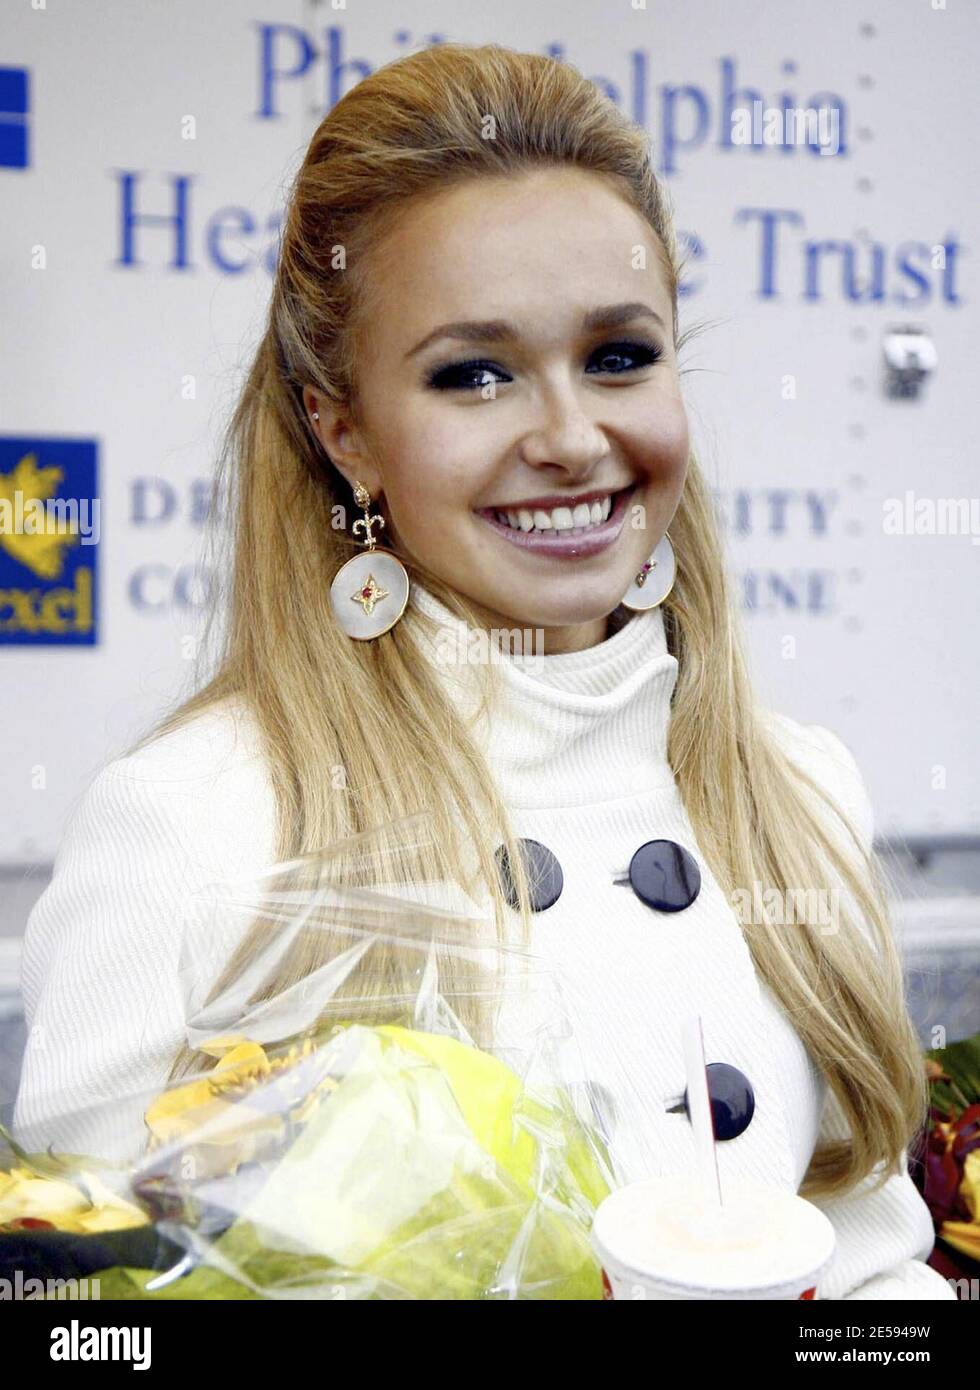 Hayden Panettiere joined forces with McDonald's today to help raise awareness for World Children's Day. The 'Heroes' actress was on hand at one of the McDonald's Restaurants on Broad and Carpenter streets and gave autographs to every customer who donated a dollar to the 'Give a Hand' charity that supports the Ronald McDonald House. Philadelphia, Pa. 3/6/08.  [[taj]] Stock Photo